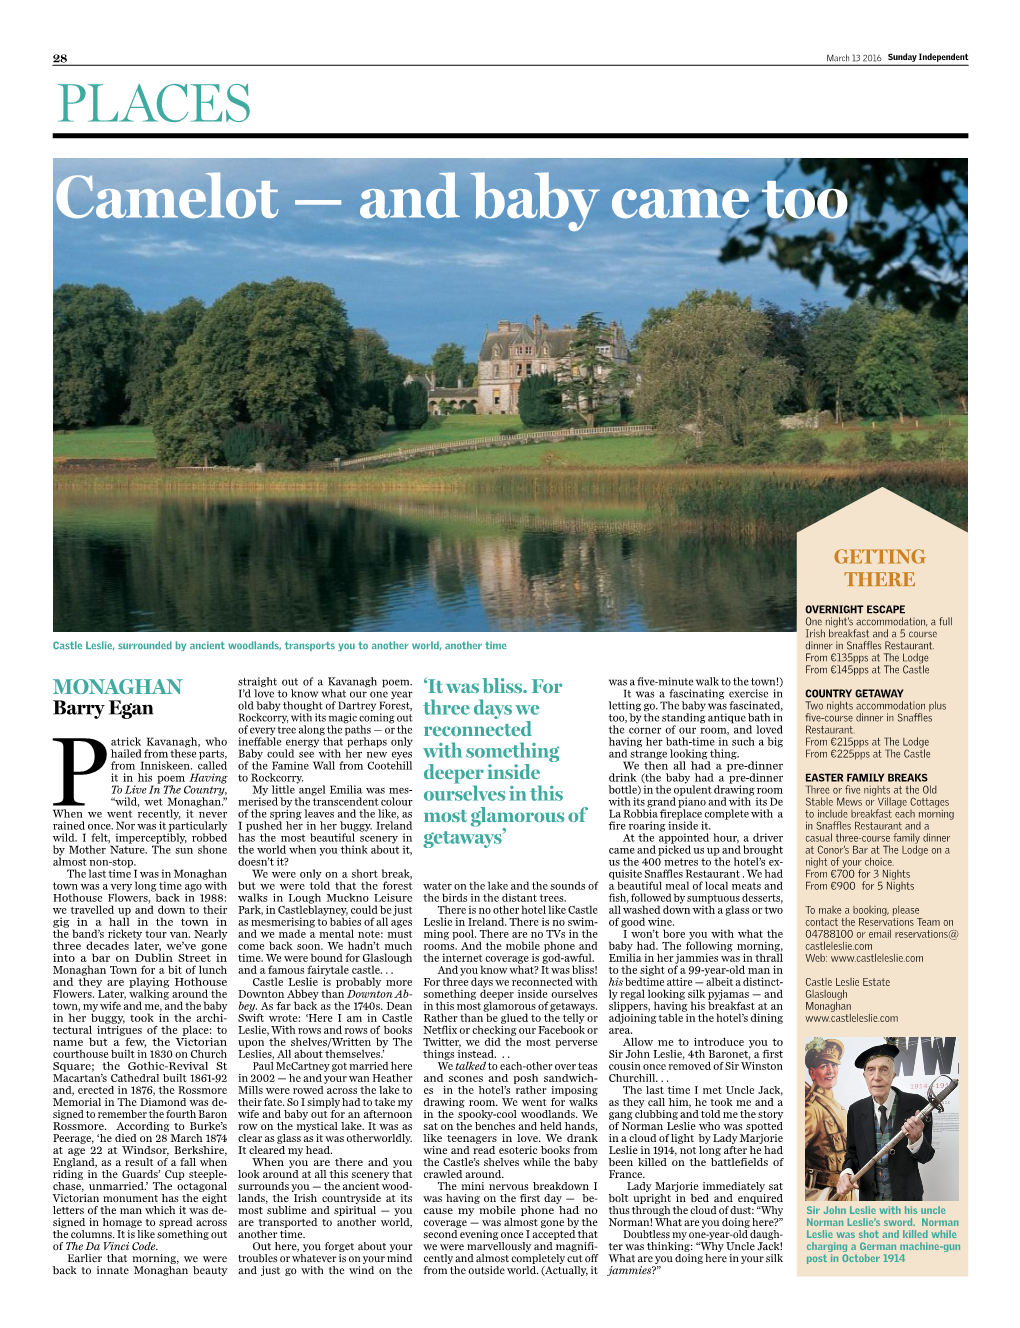 Camelot — and Baby Came Too